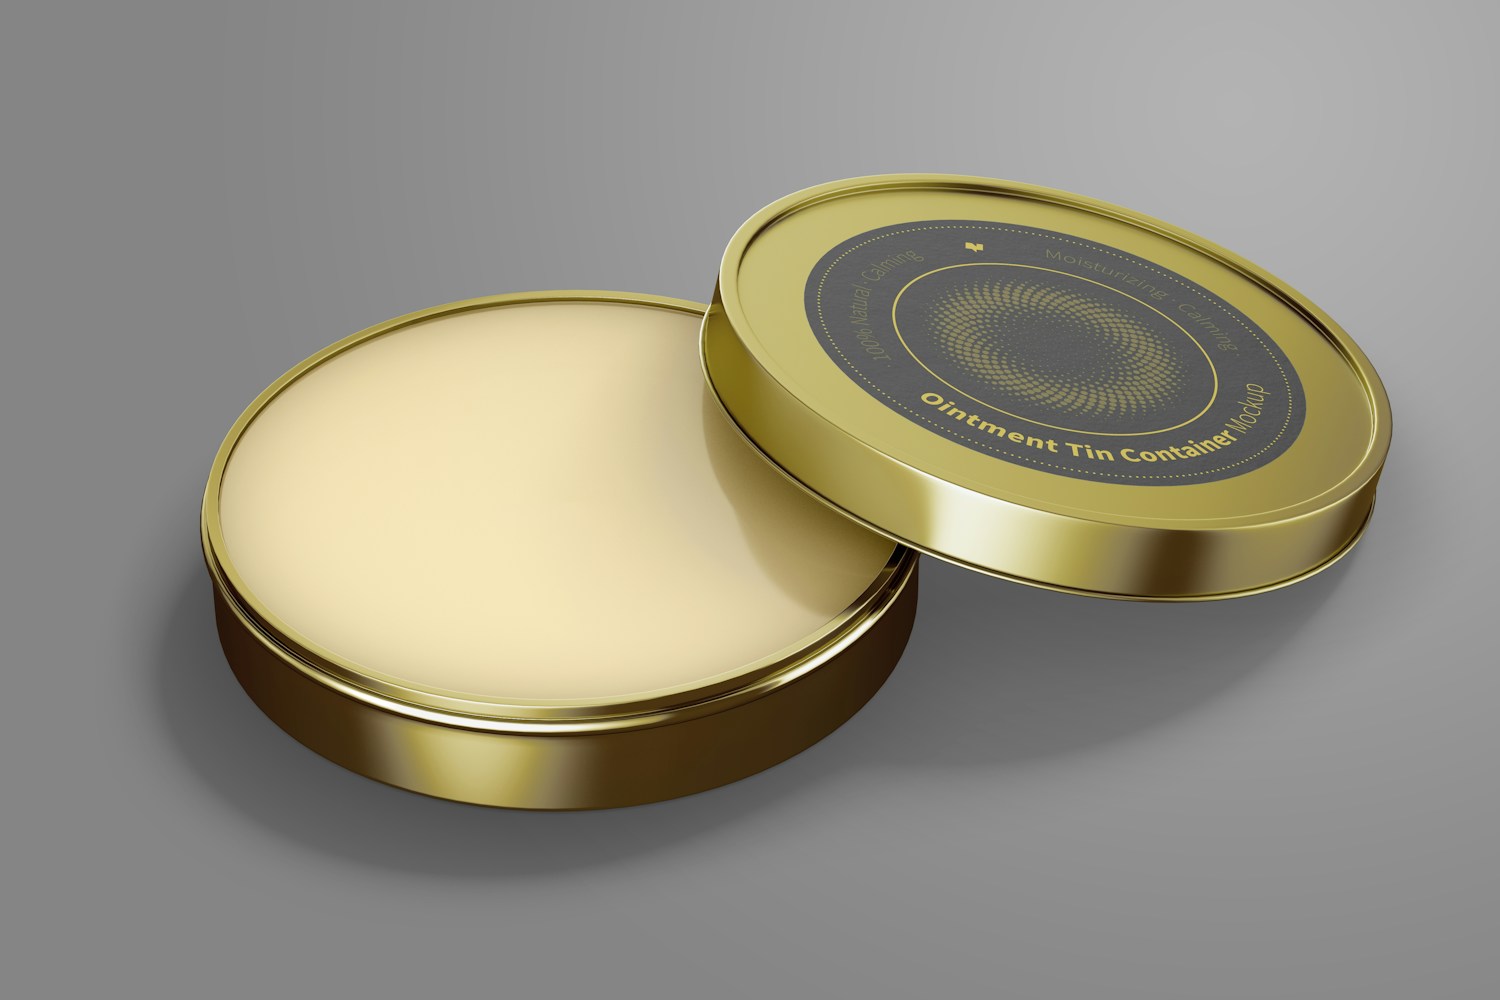 Ointment Tin Container Mockup, Opened